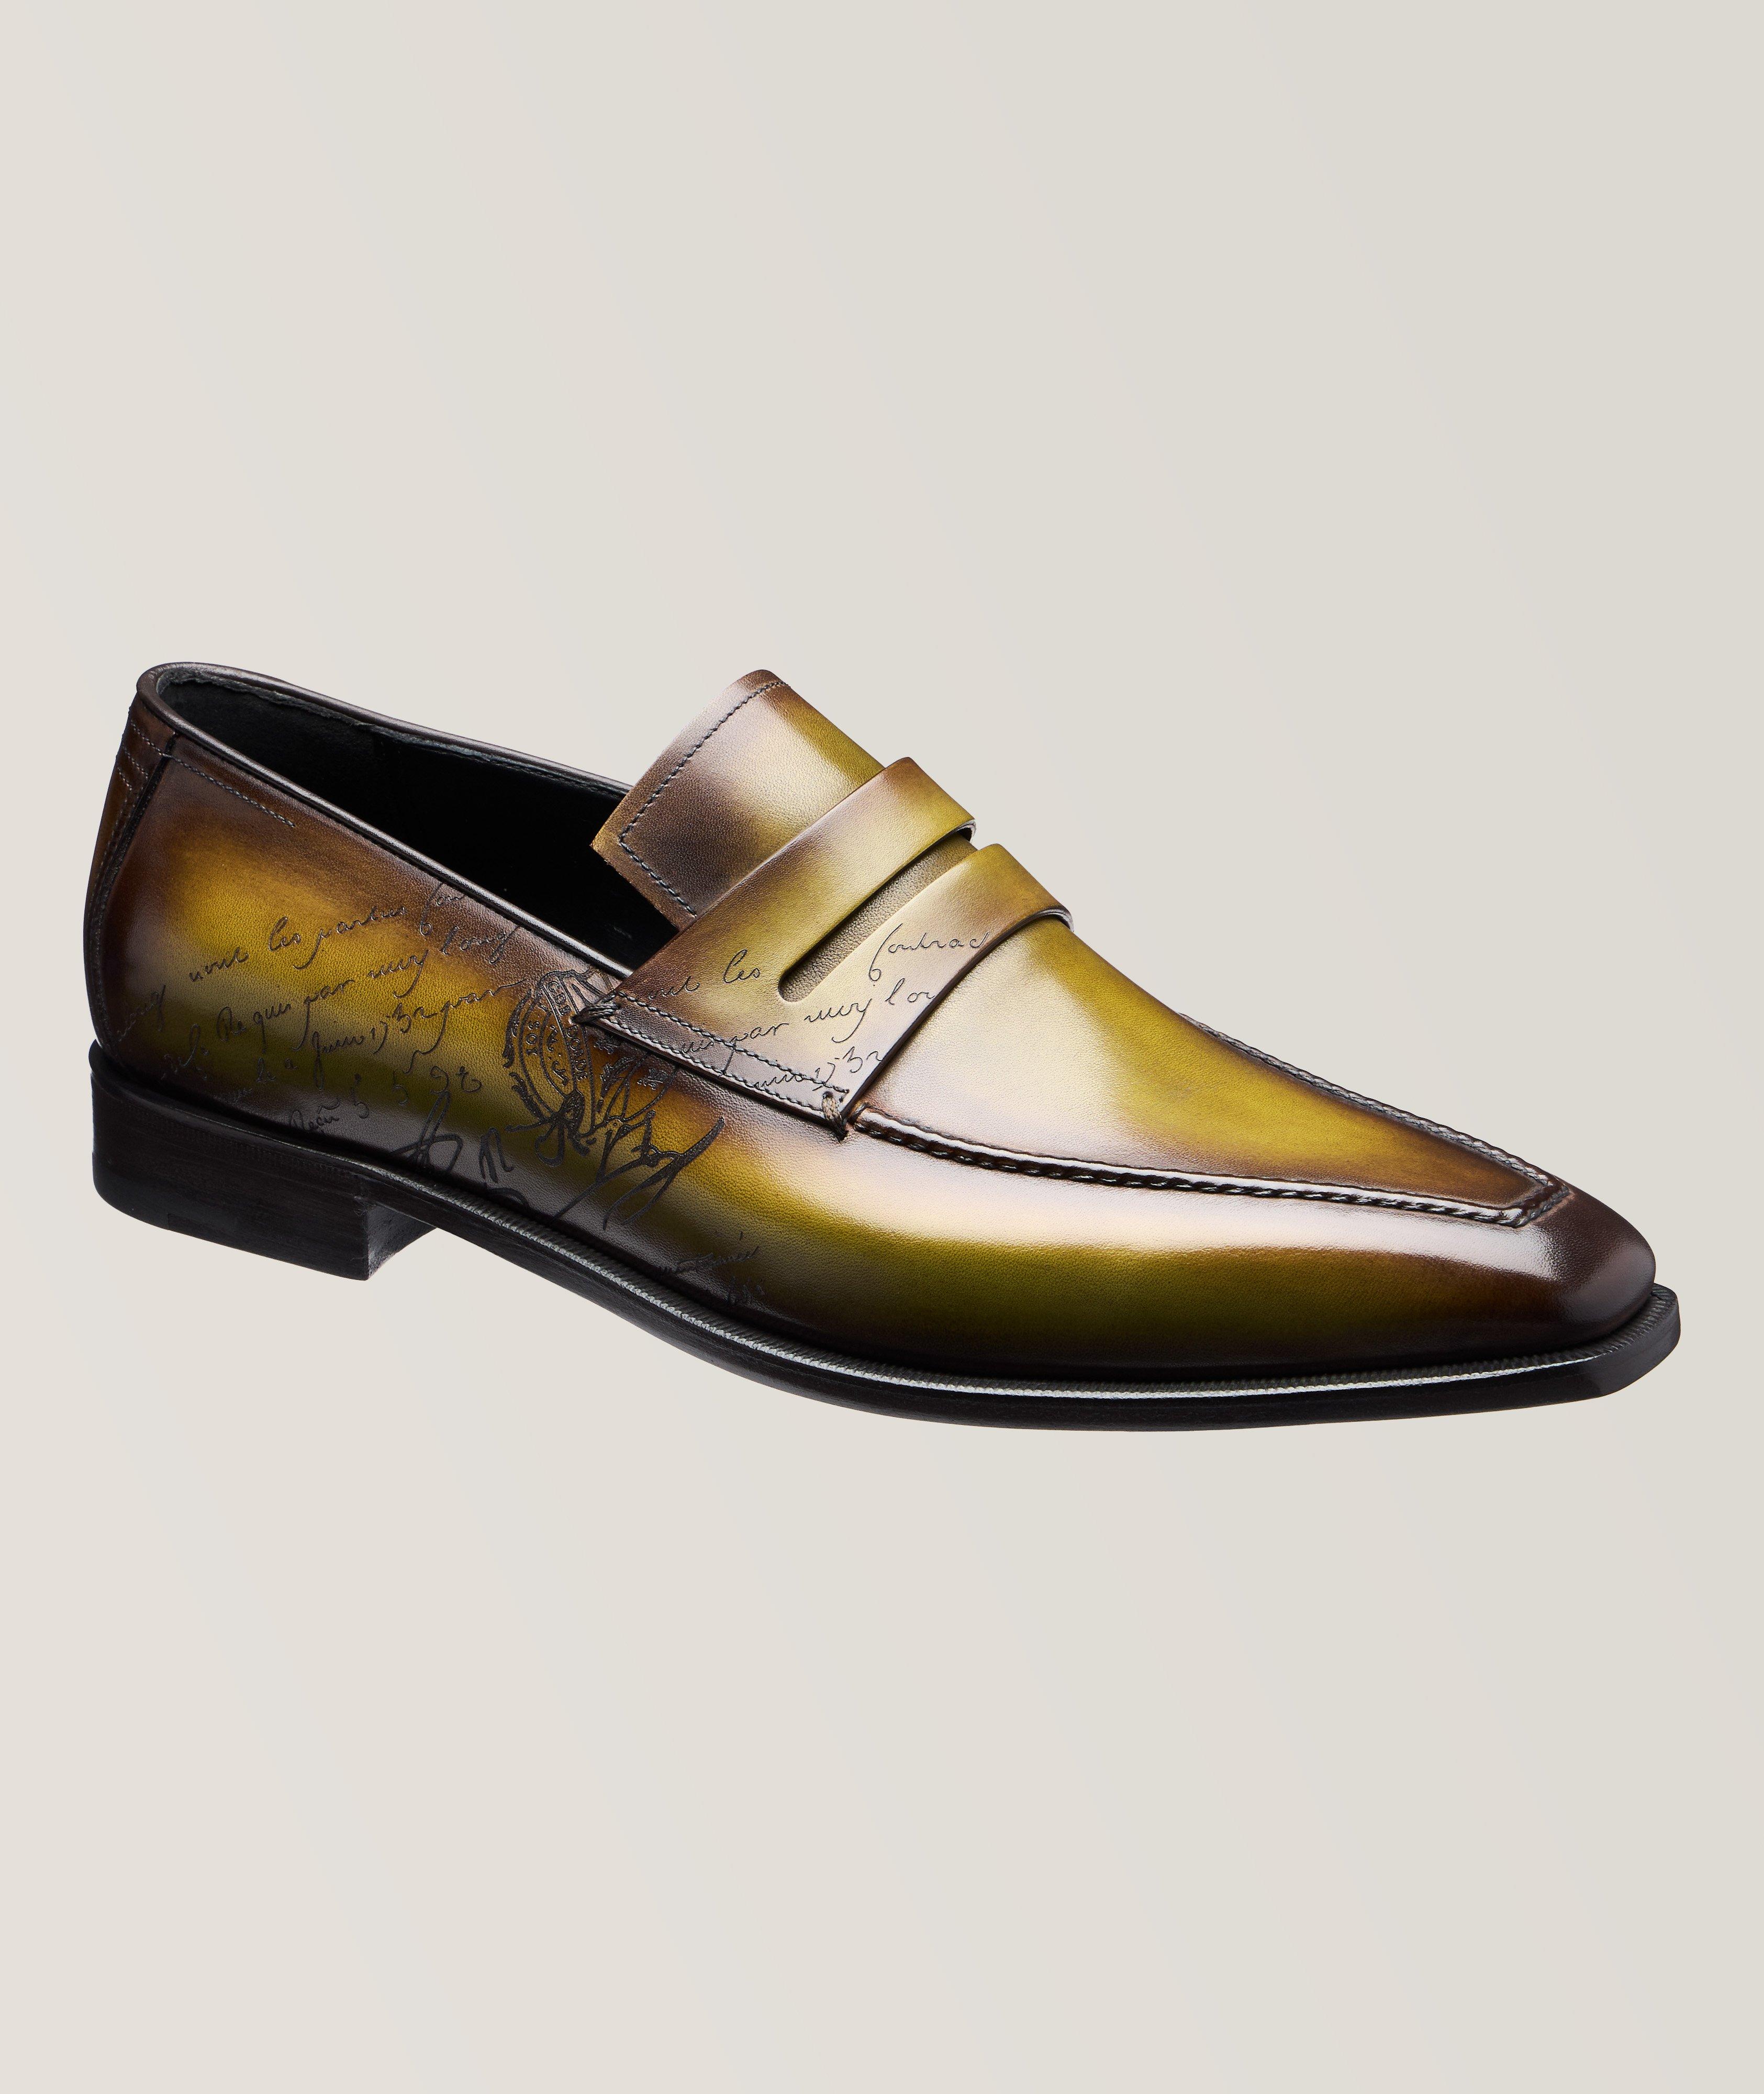 Andy Demesure Scritto Leather Penny Loafers image 0